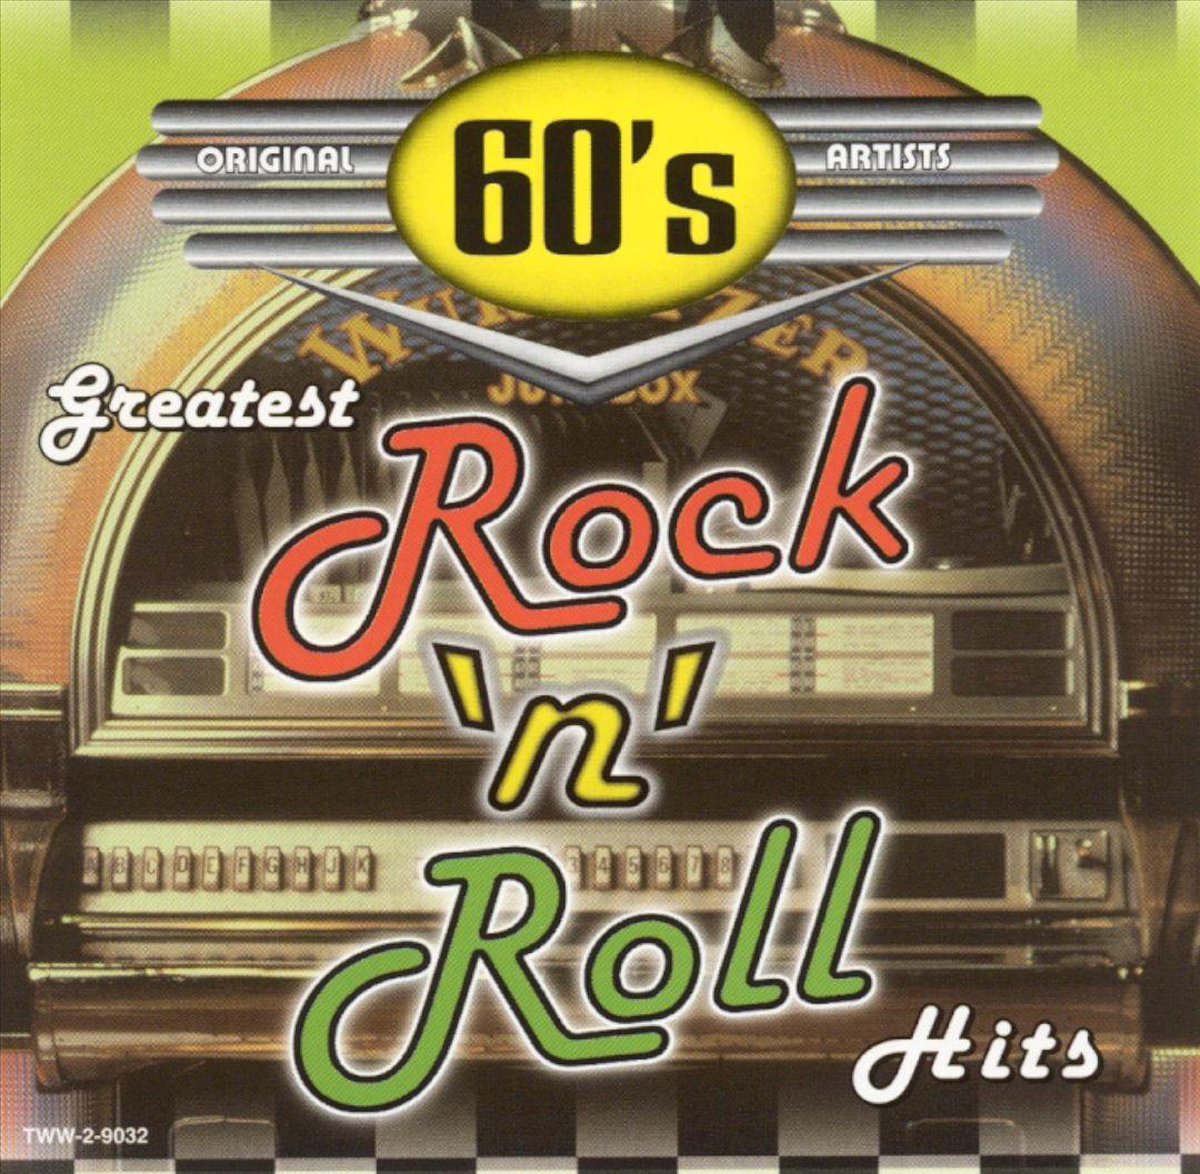 60's Rock 'n' Roll Hits 3 - various artists